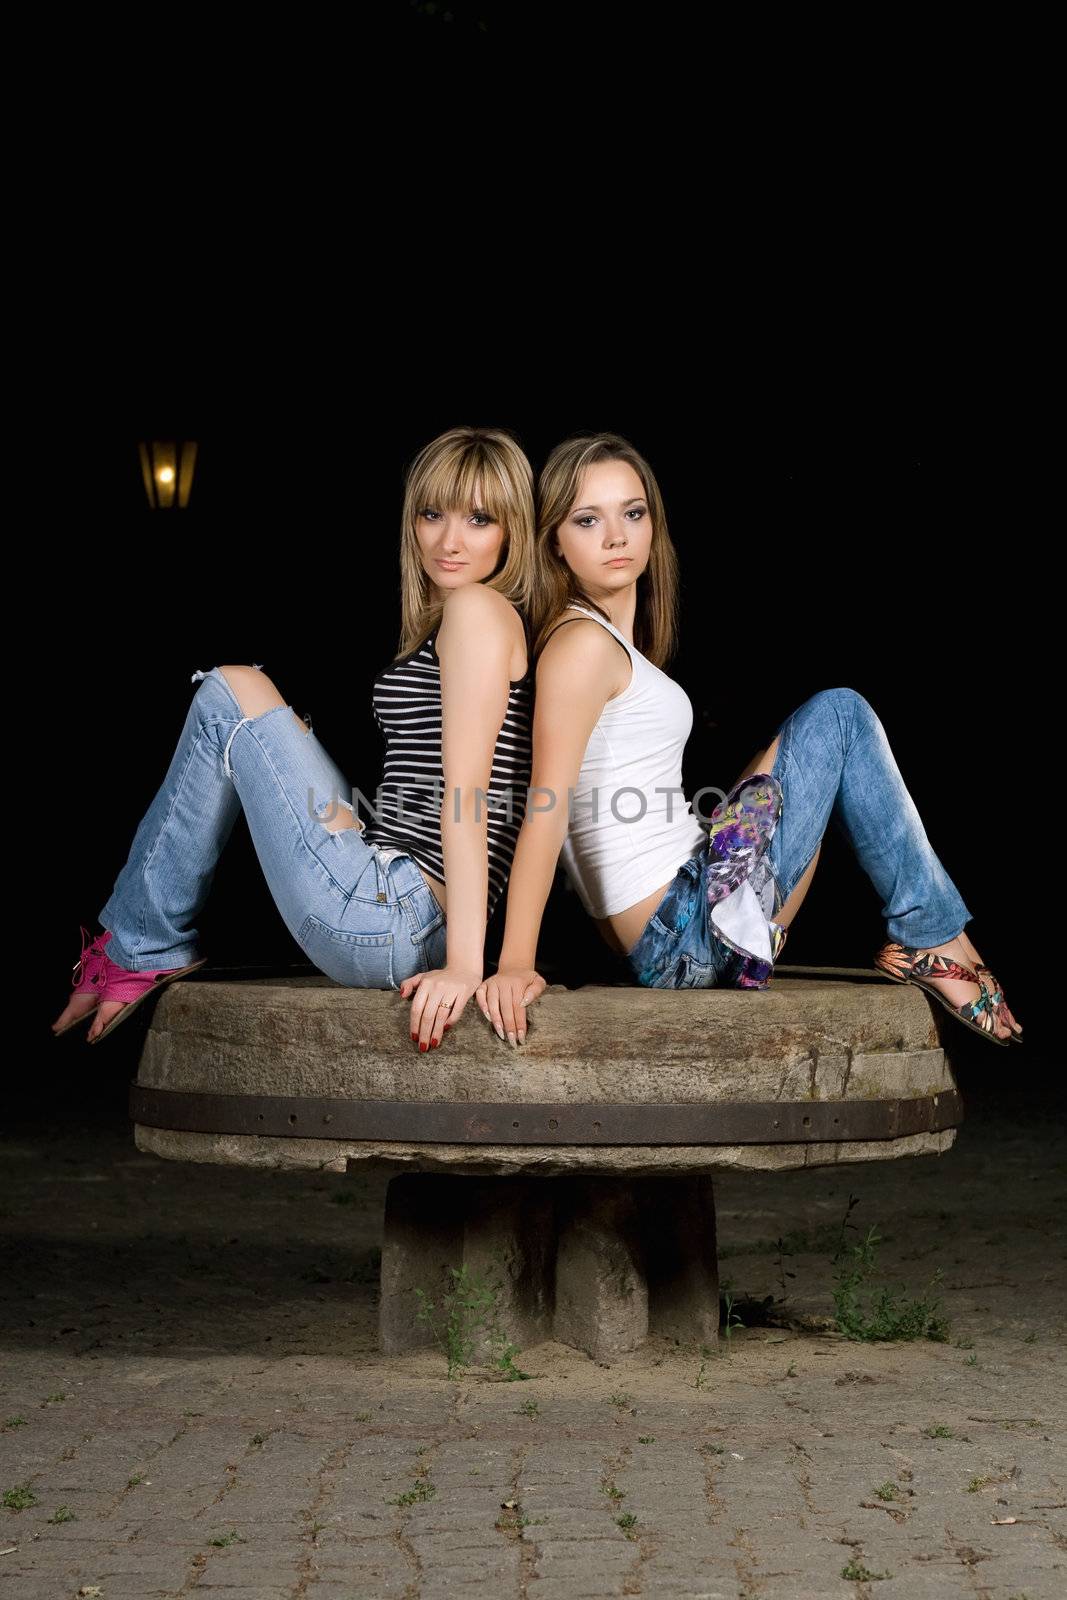 Two attractive girls sitting on a stone bench